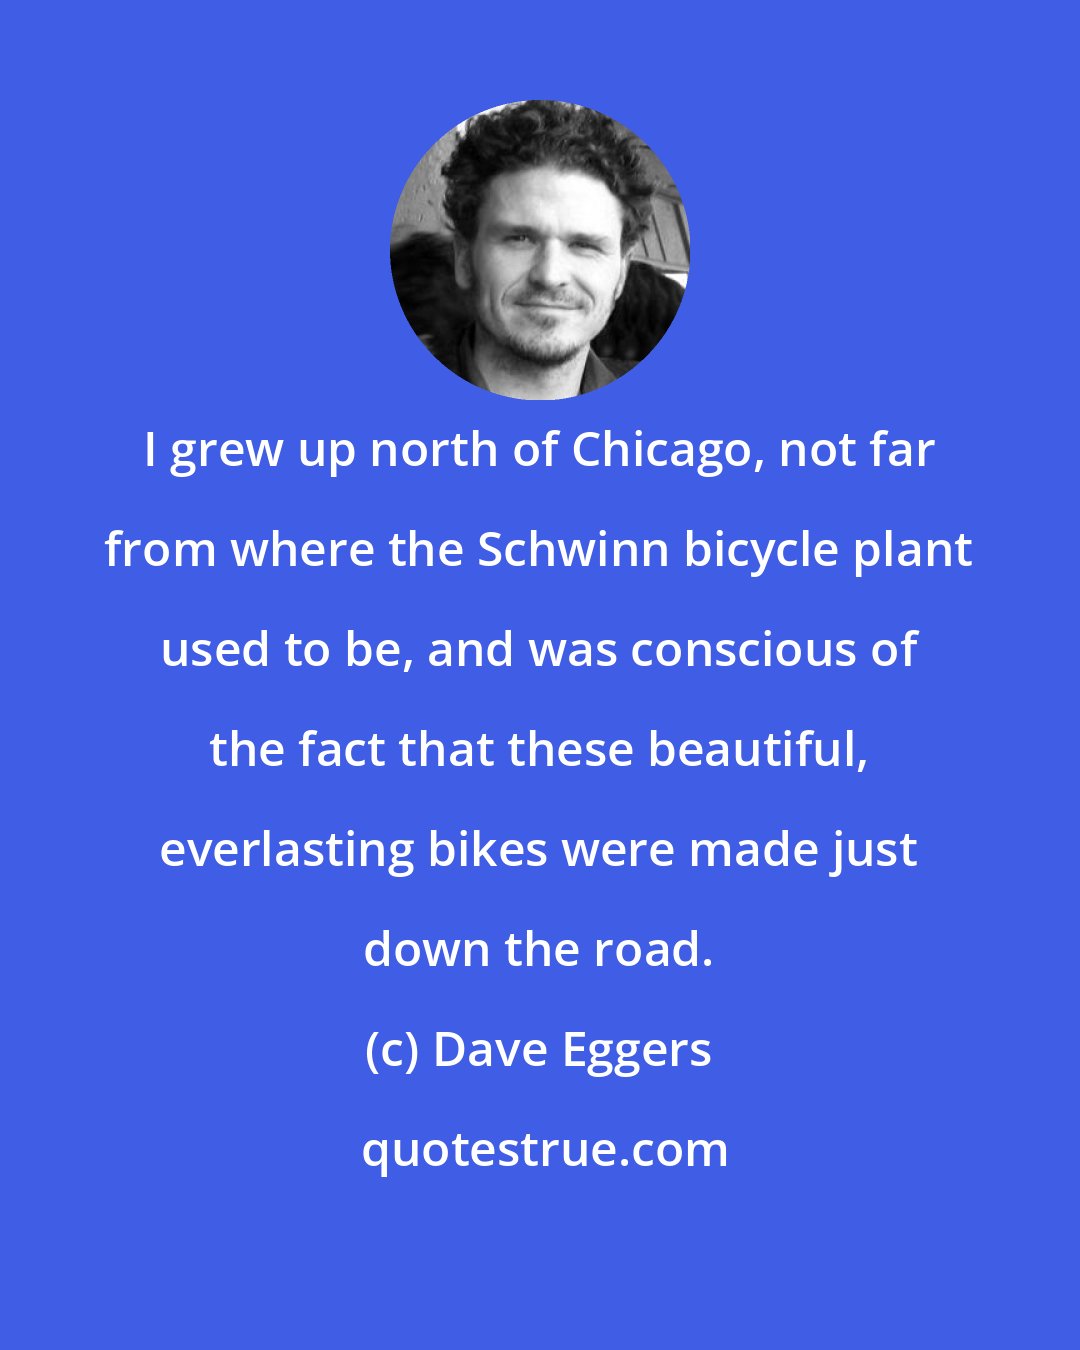 Dave Eggers: I grew up north of Chicago, not far from where the Schwinn bicycle plant used to be, and was conscious of the fact that these beautiful, everlasting bikes were made just down the road.